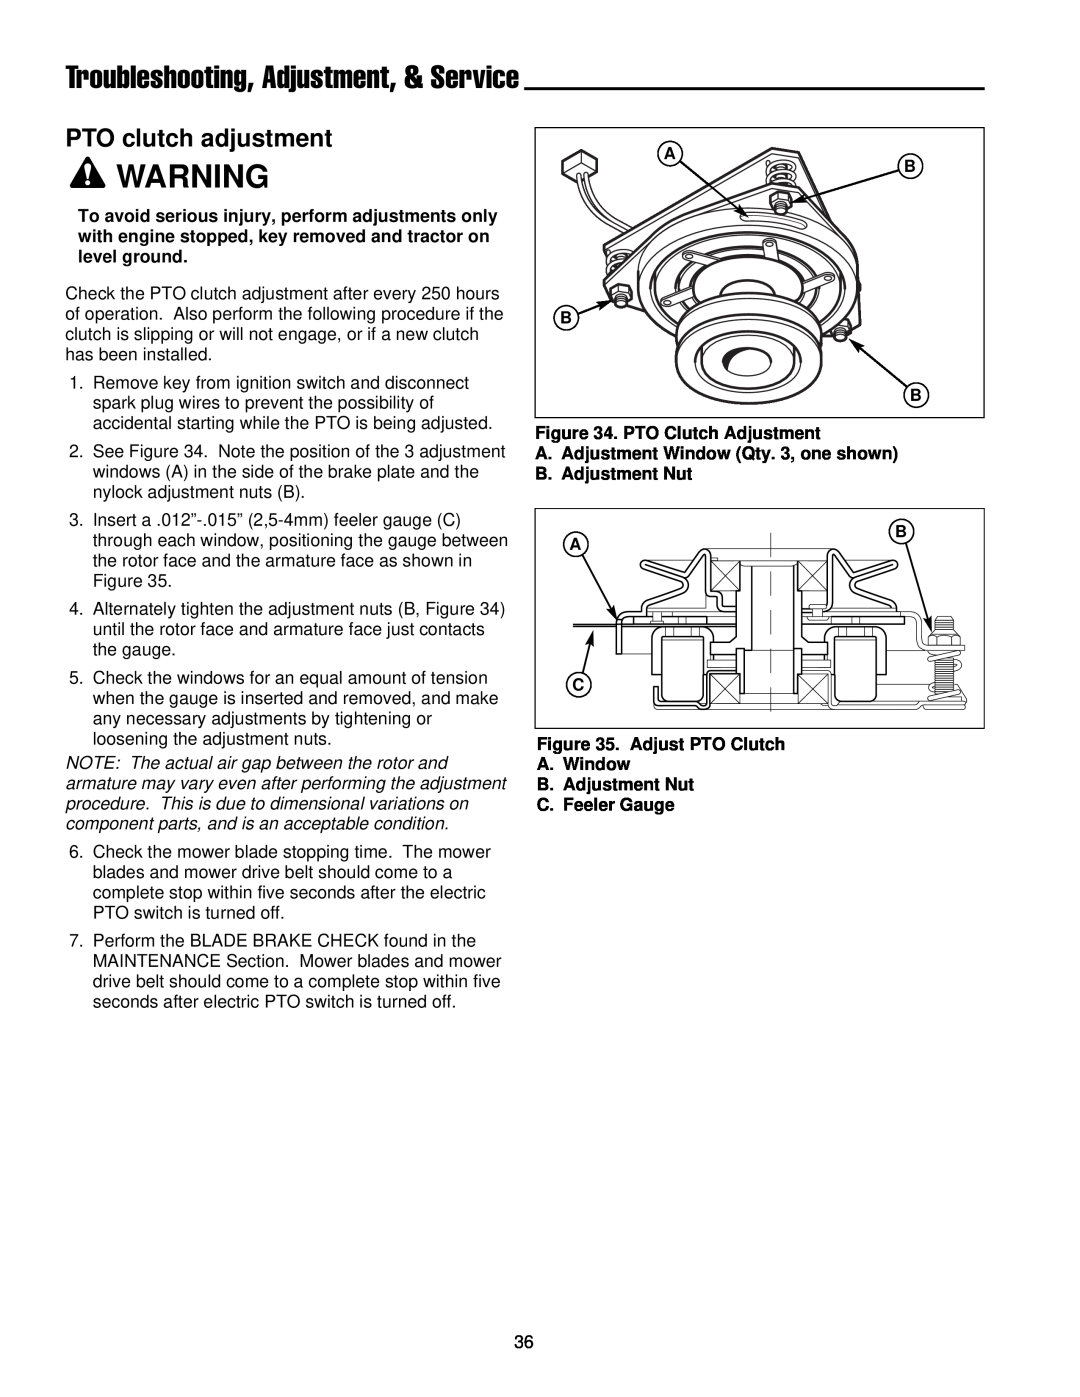 Simplicity 300 Series manual PTO clutch adjustment, Troubleshooting, Adjustment, & Service 